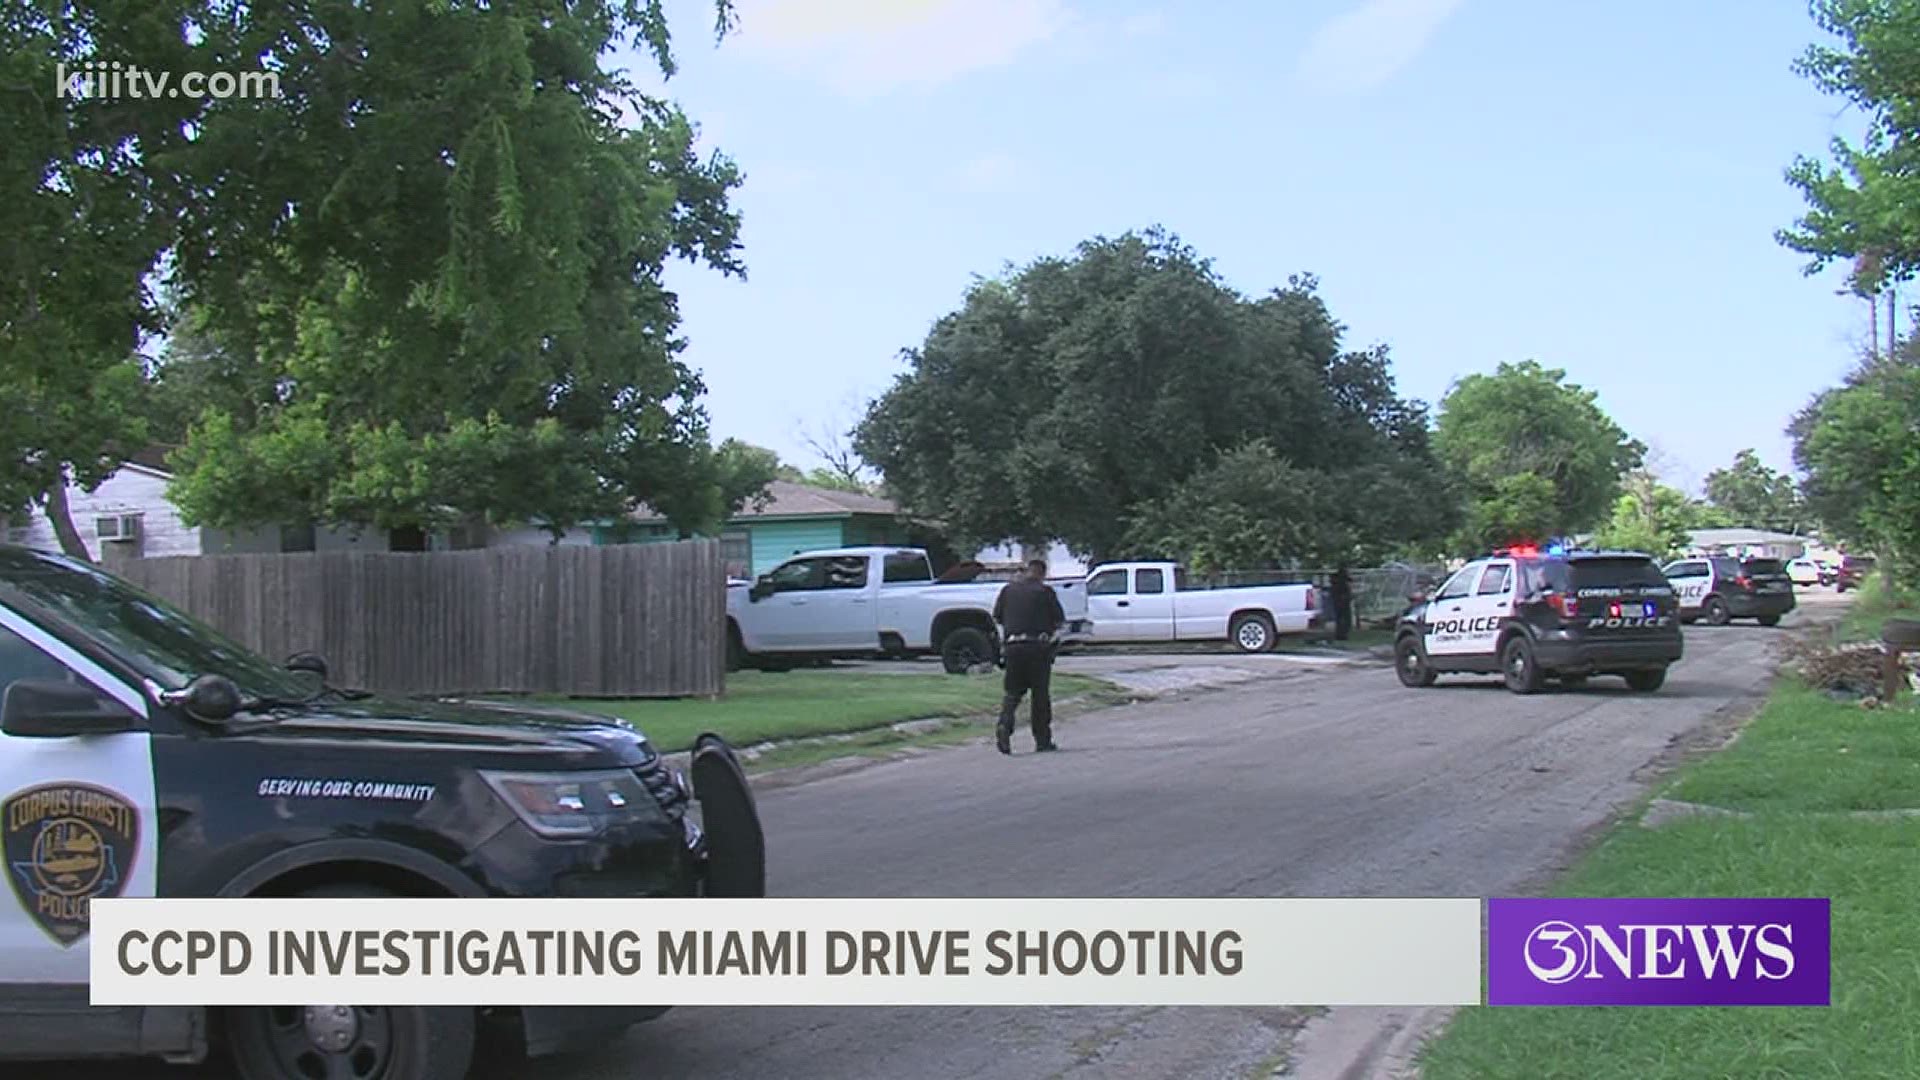 The shooting happened in the 1200 block of Miami Drive.